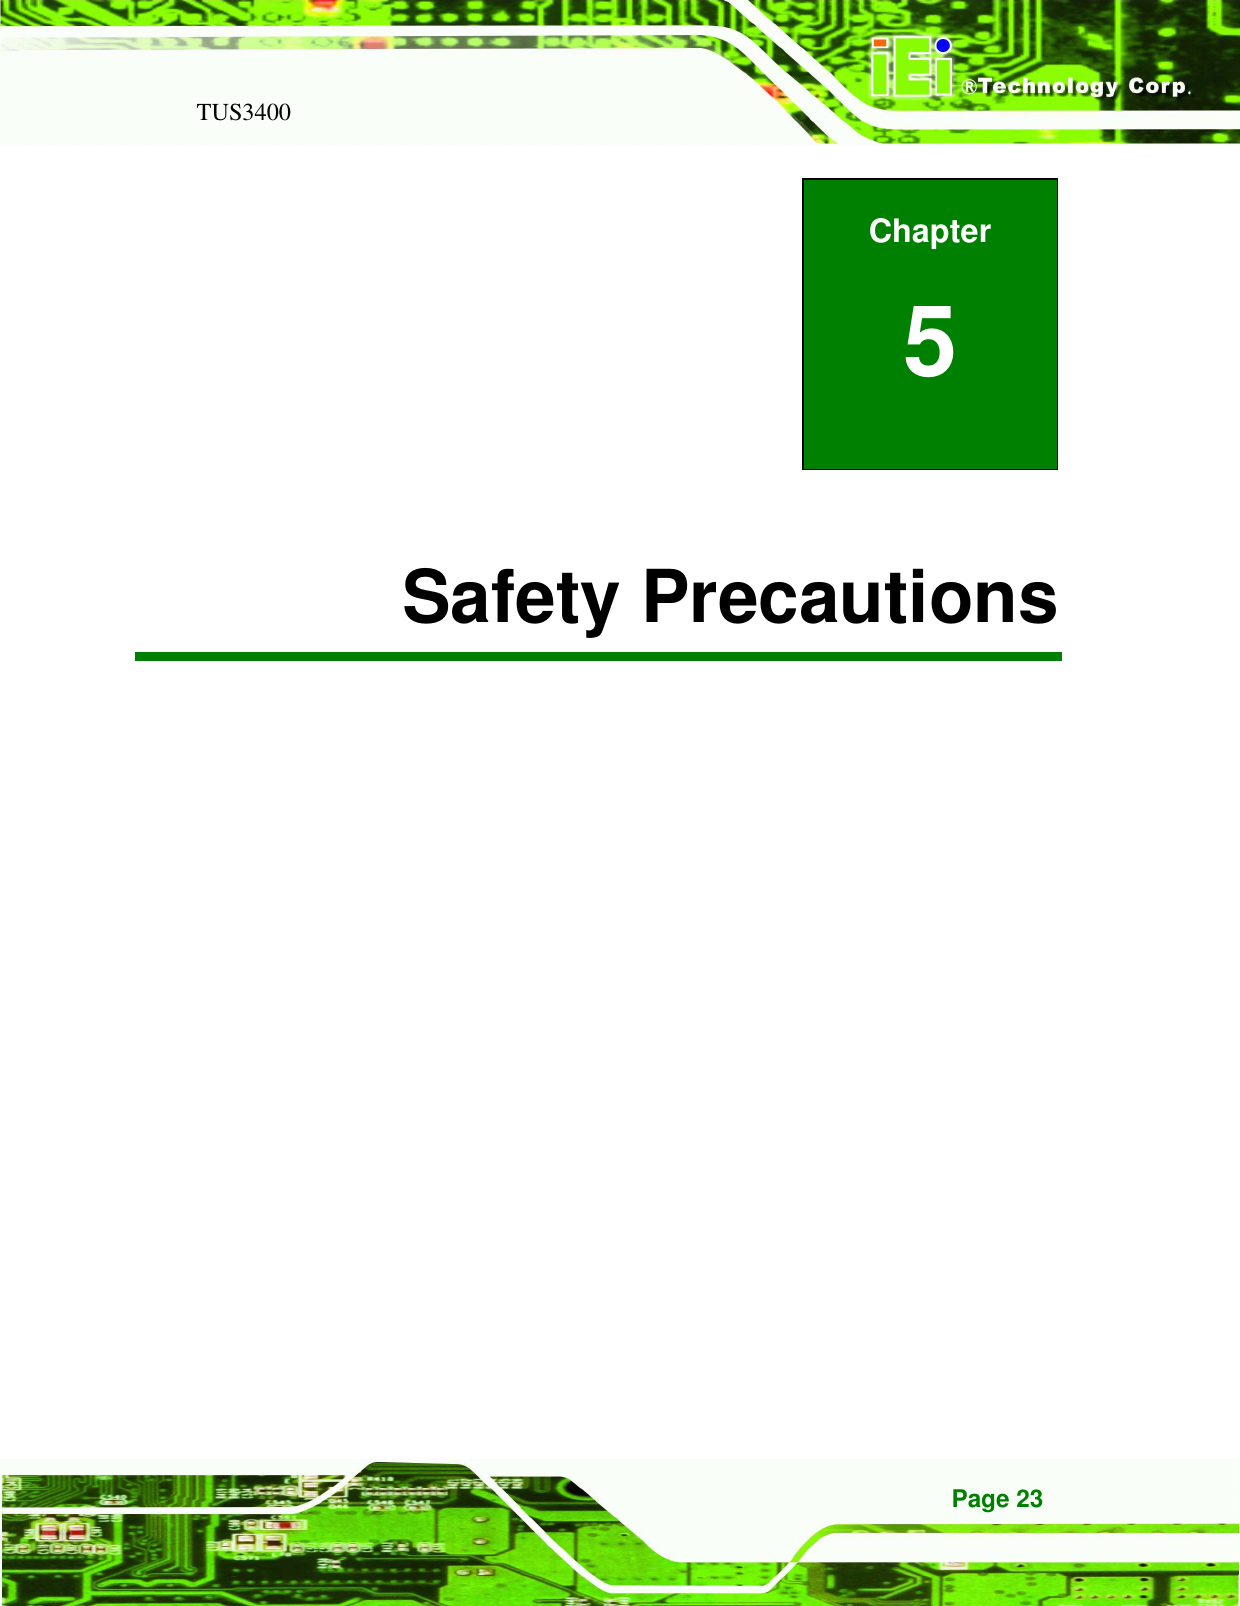   TUS3400 Page 23          A Safety Precautions Chapter 5 